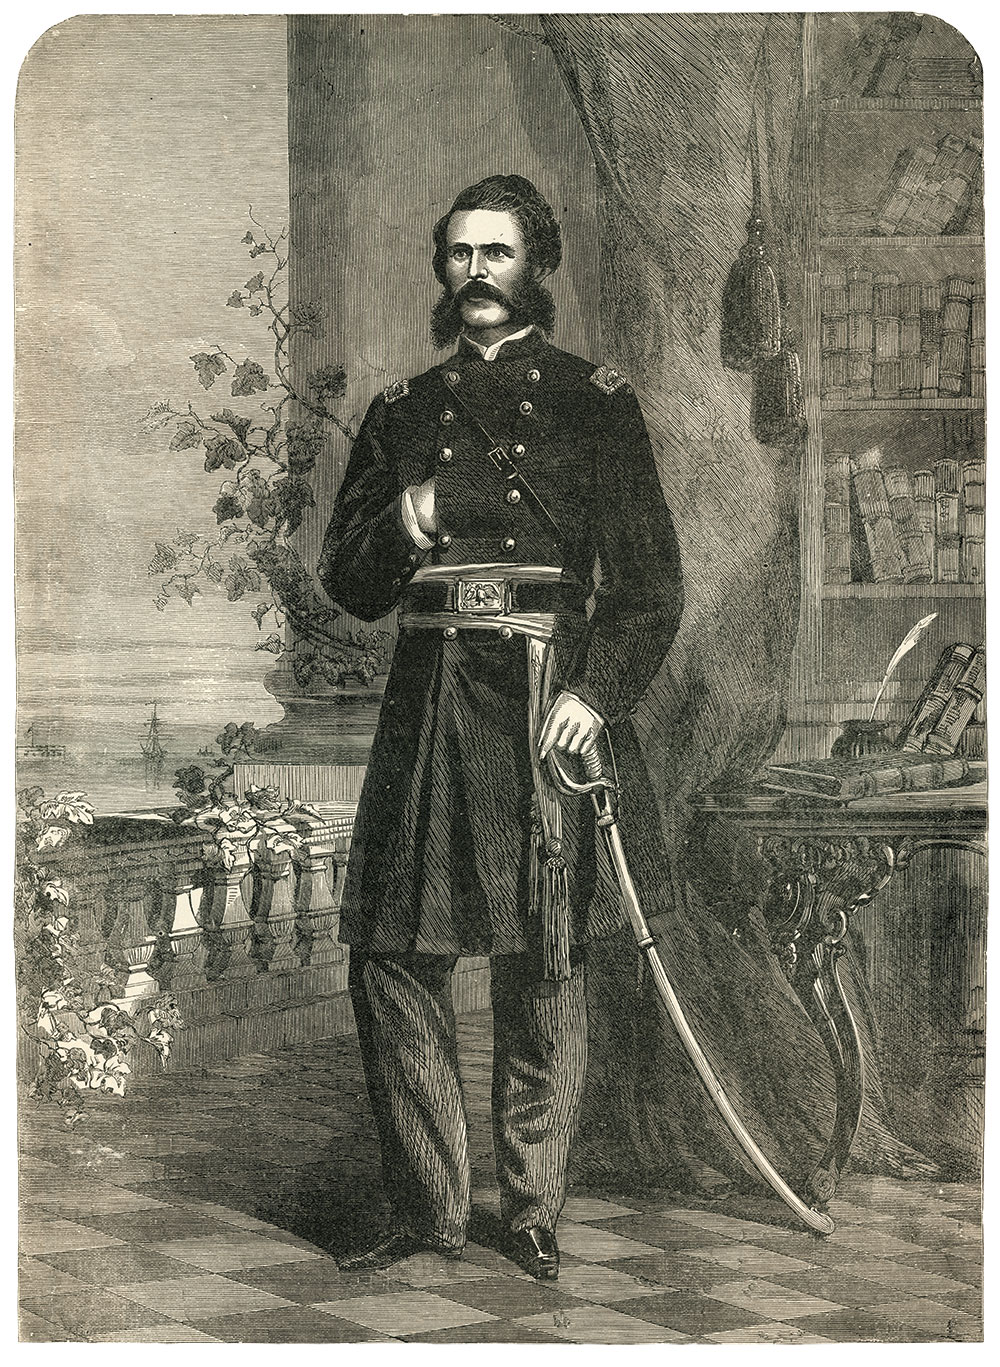 Baker’s reputation rebounded in the late 19th century. Frank Leslie’s 1896 illustrated book Famous Leaders and Battle Scenes of the Civil War included this full page engraving of Baker. The caption hailed him as a hero, celebrating his “high executive ability and wonderful talent for tracing conspiracy and frustrating the designs of Confederate spies and agents.” It also notes, “His duties naturally made him enemies in influential quarters, and charges of a serious nature were several times preferred against him, but were never substantiated.” Ronald S. Coddington Collection.